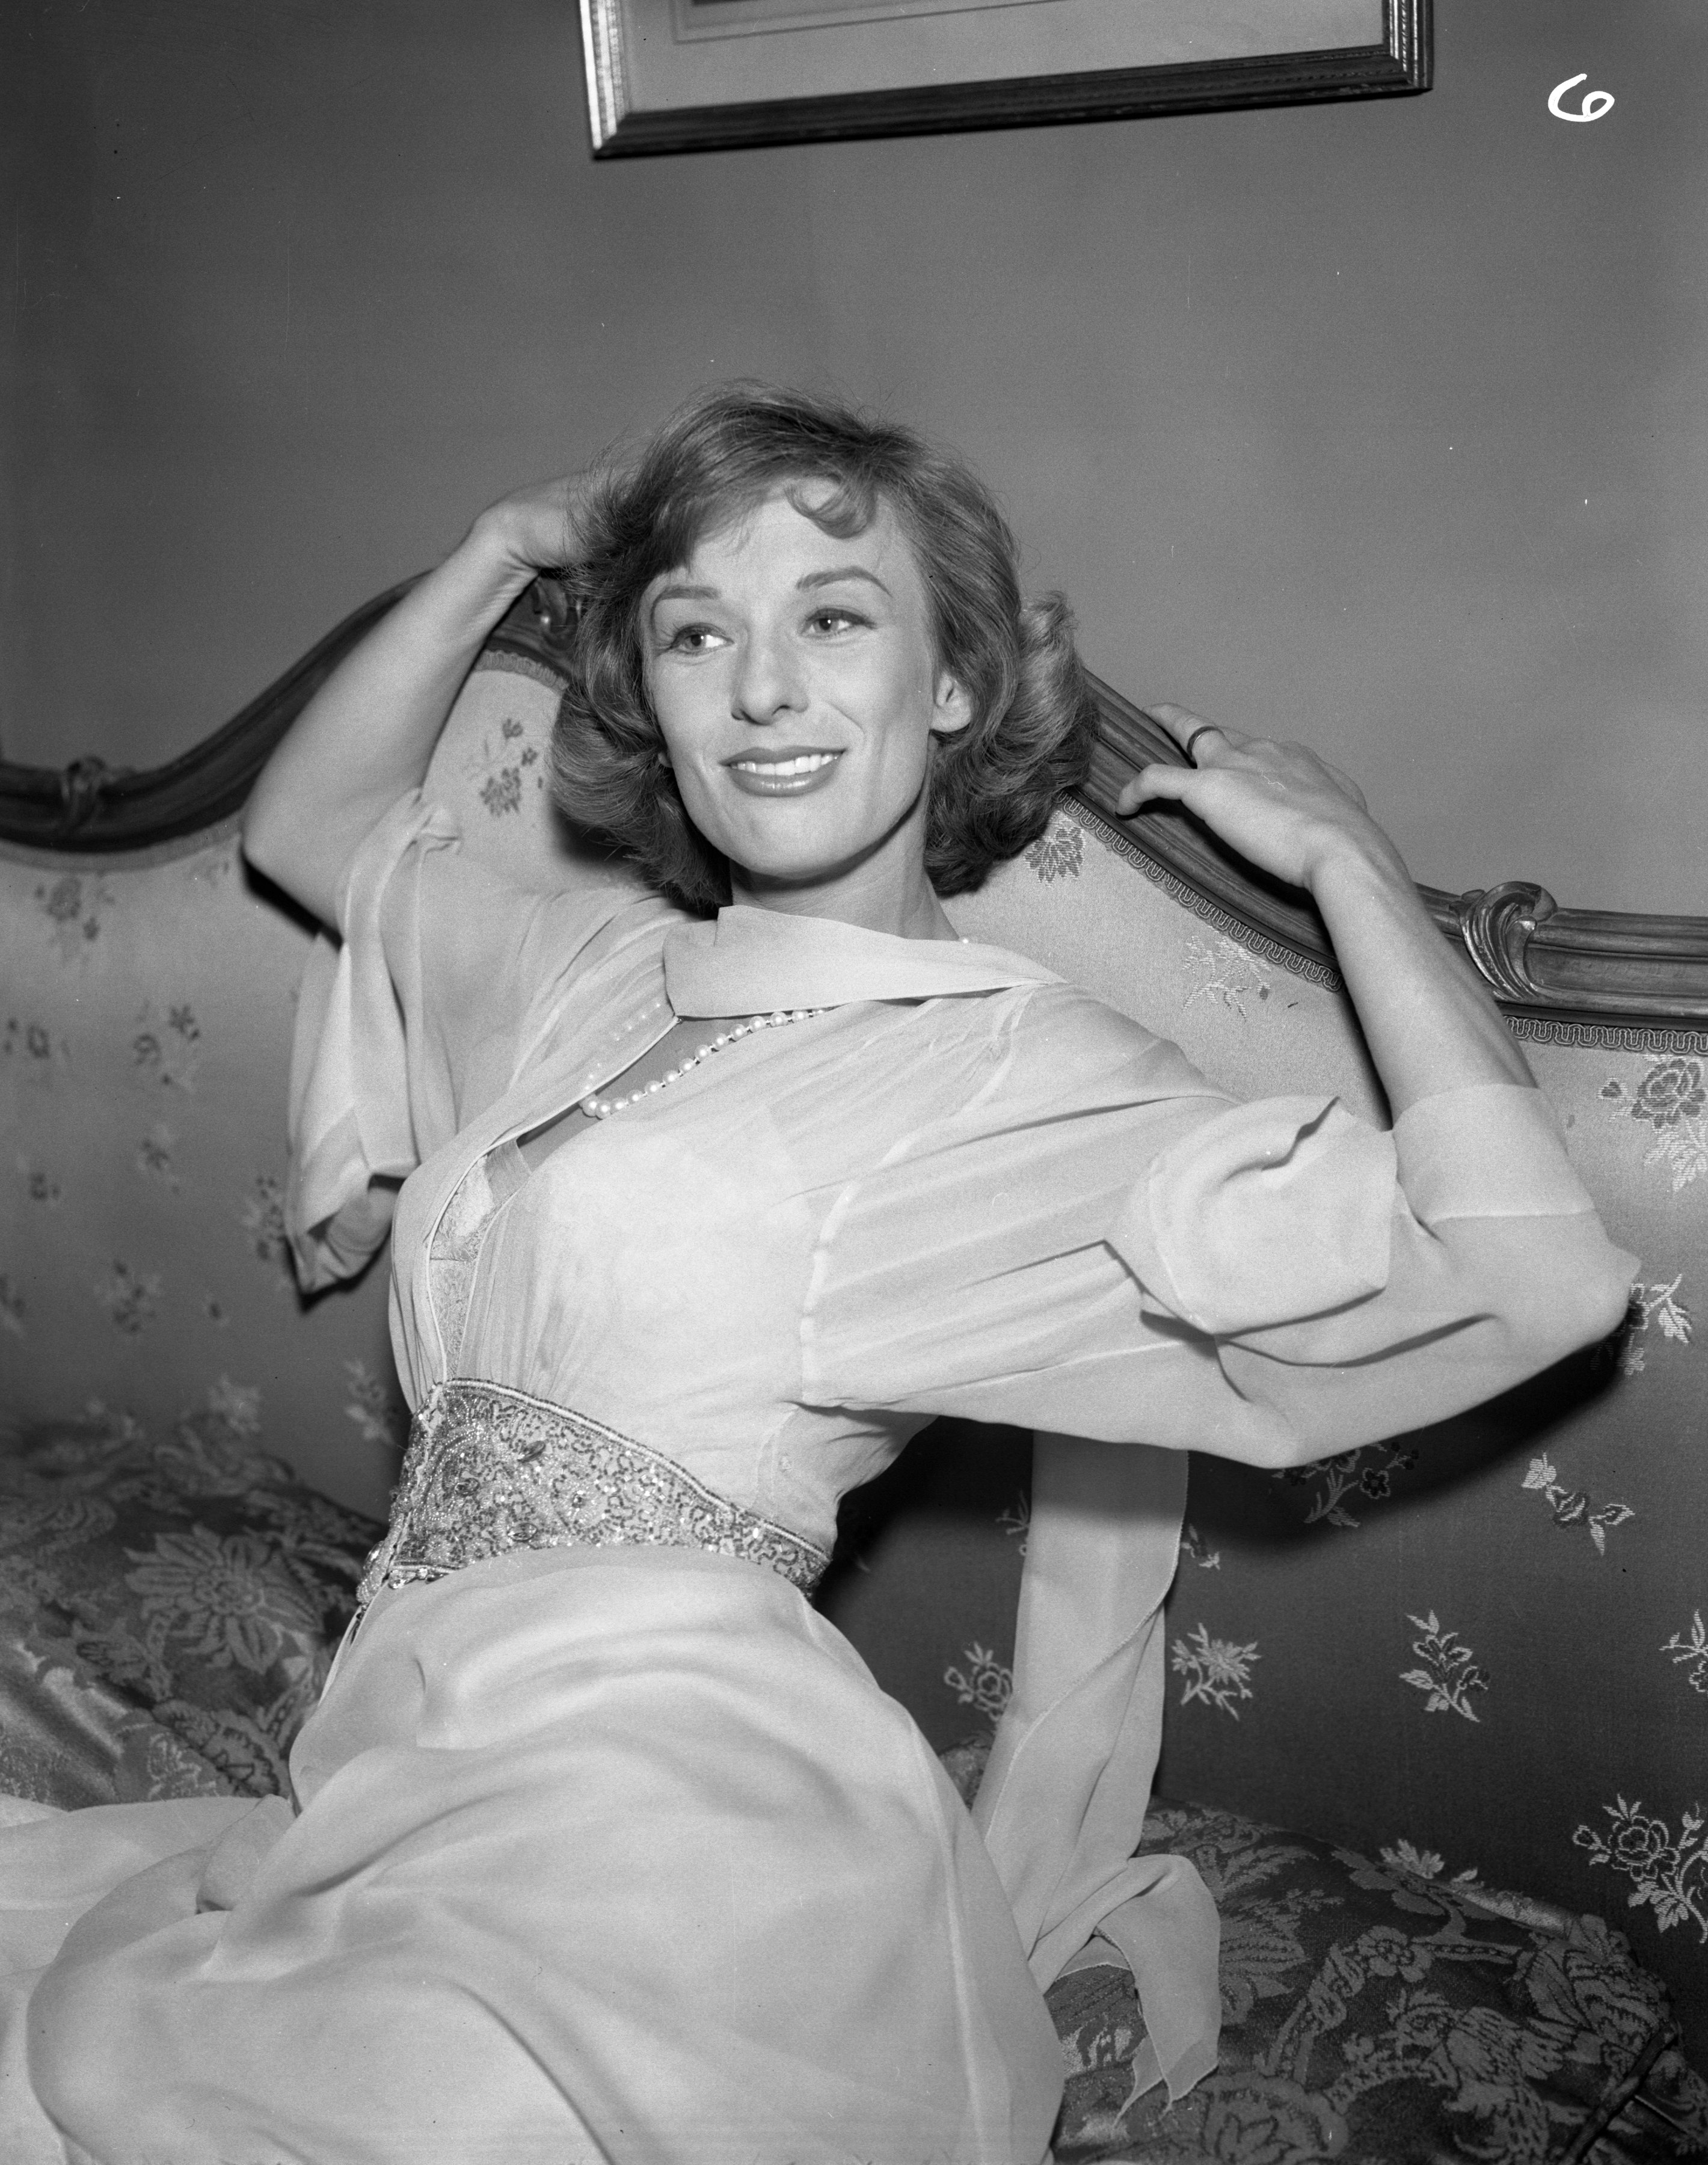 Cloris Leachman at an event for The Untouchables (1959)